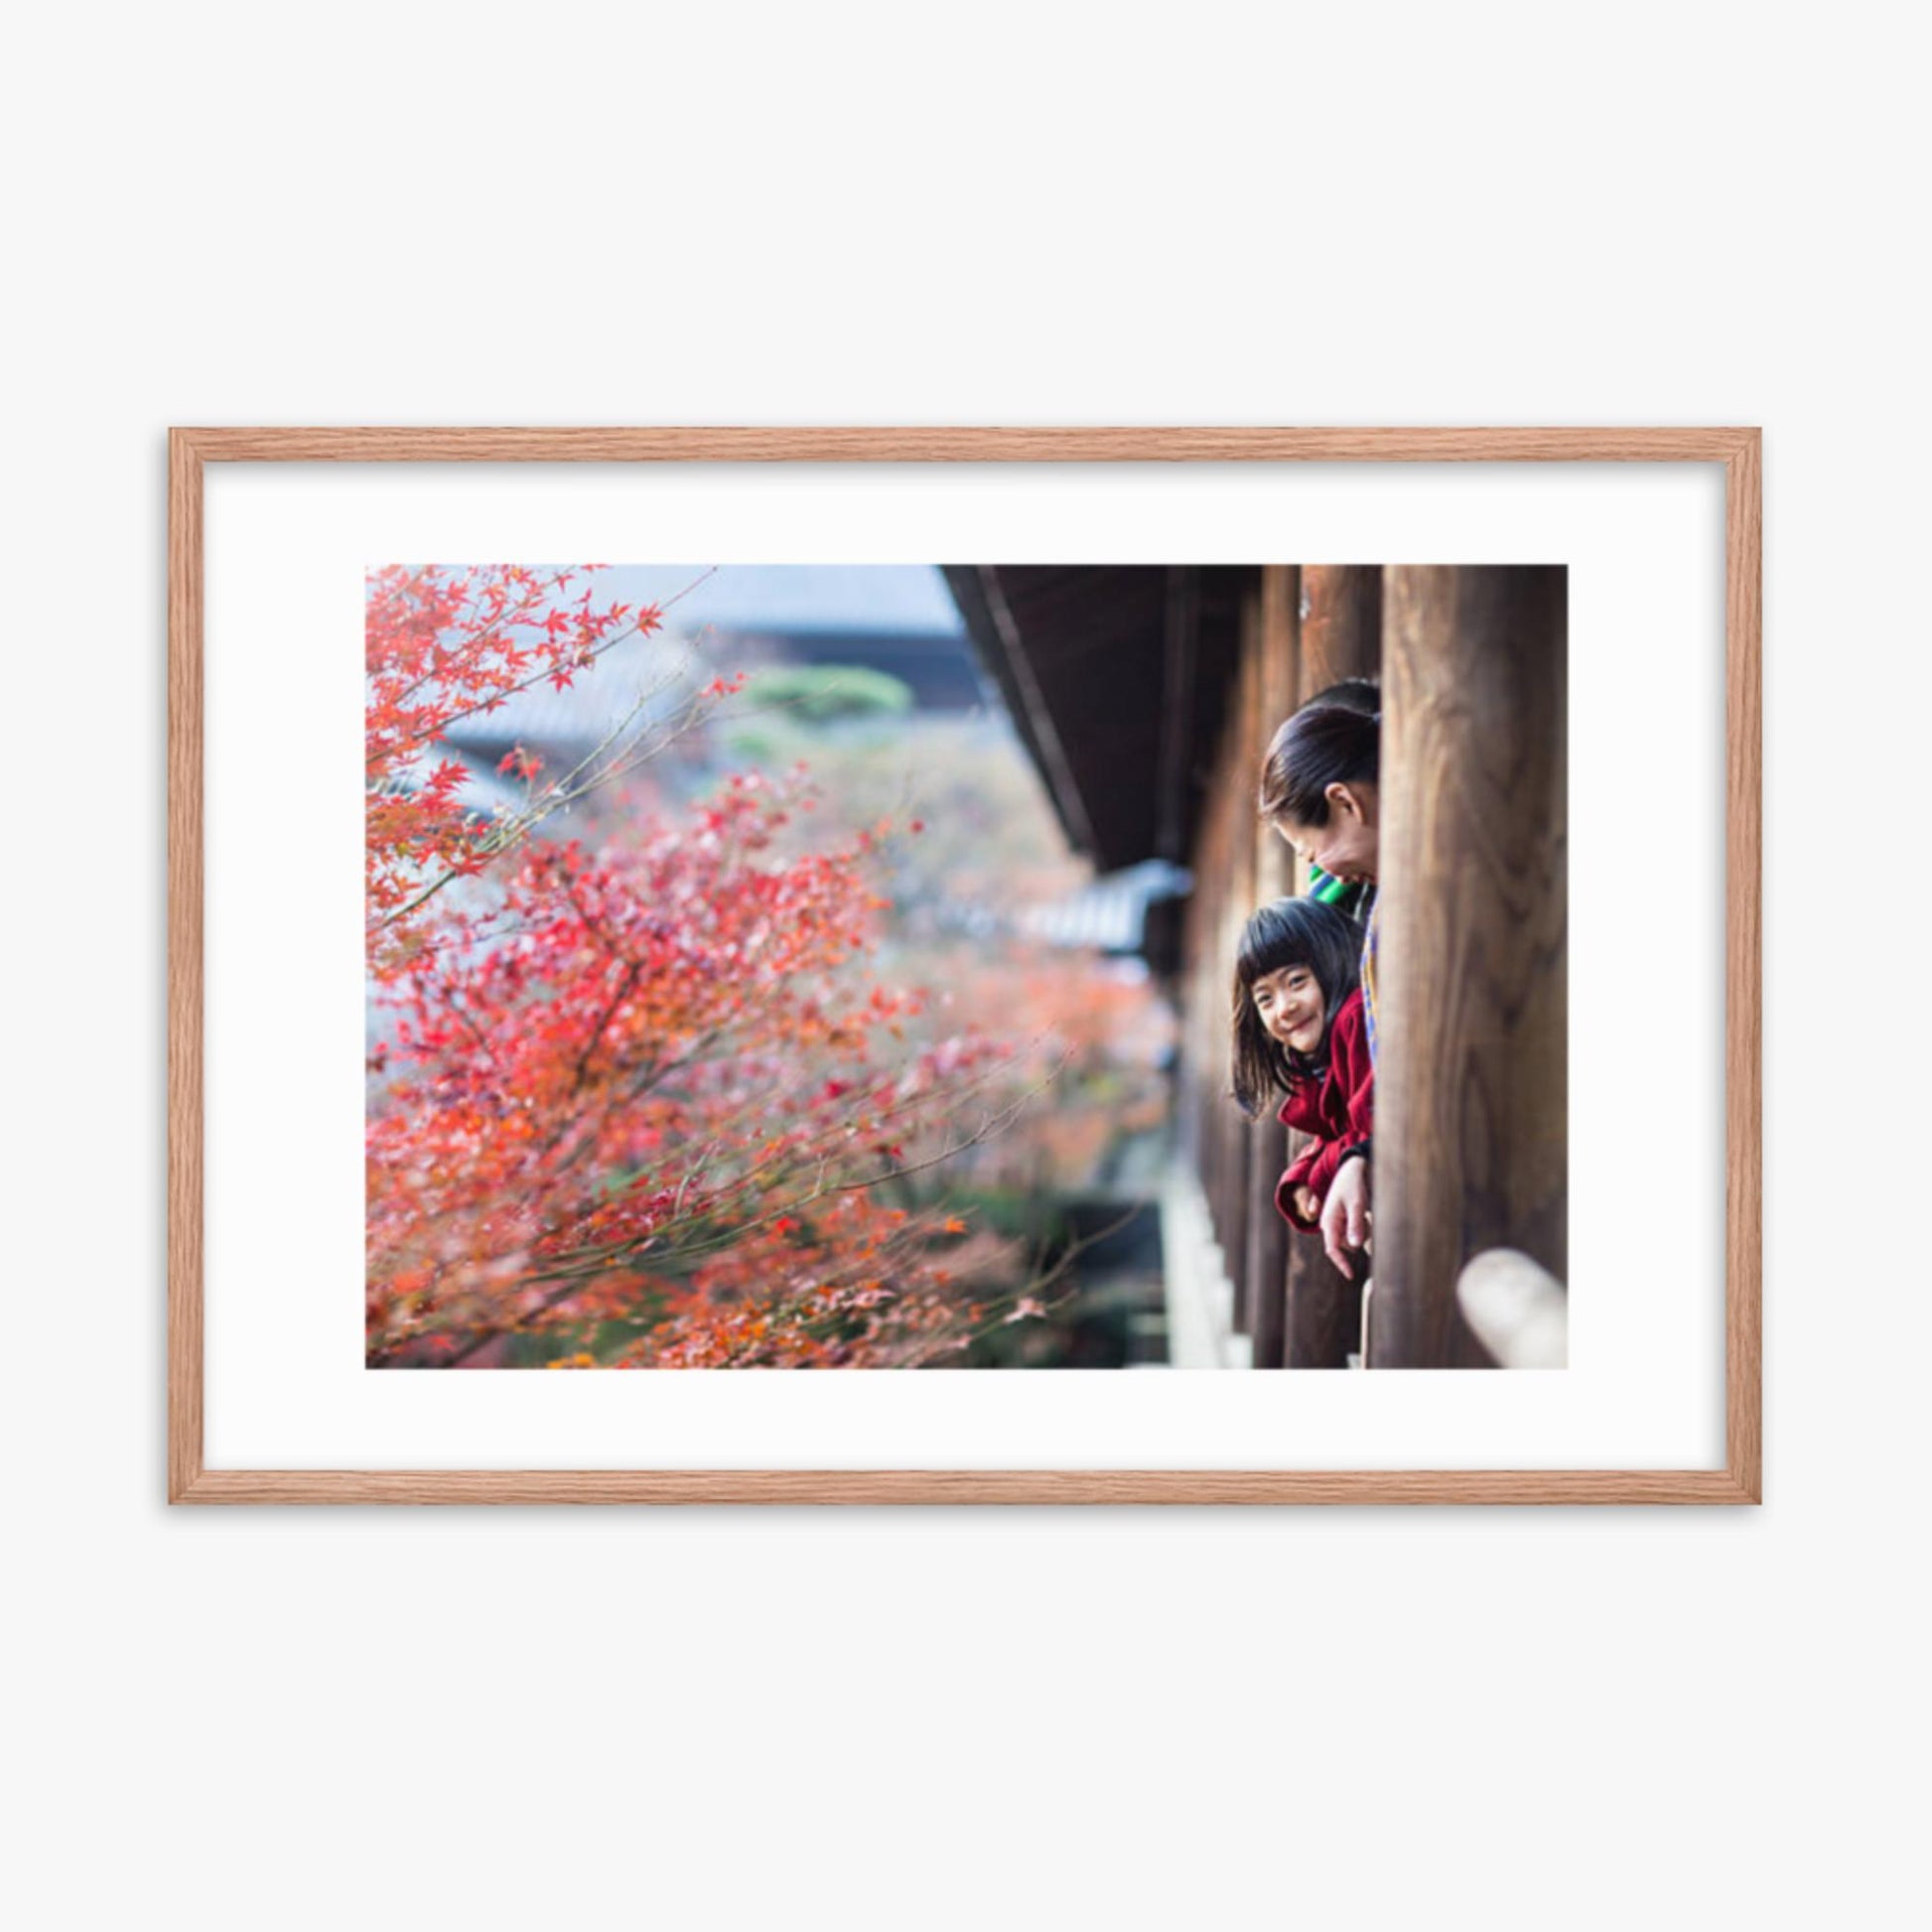 Father, mother and daughter at a temple enjoying autumn leaves 24x36 in Poster With Oak Frame